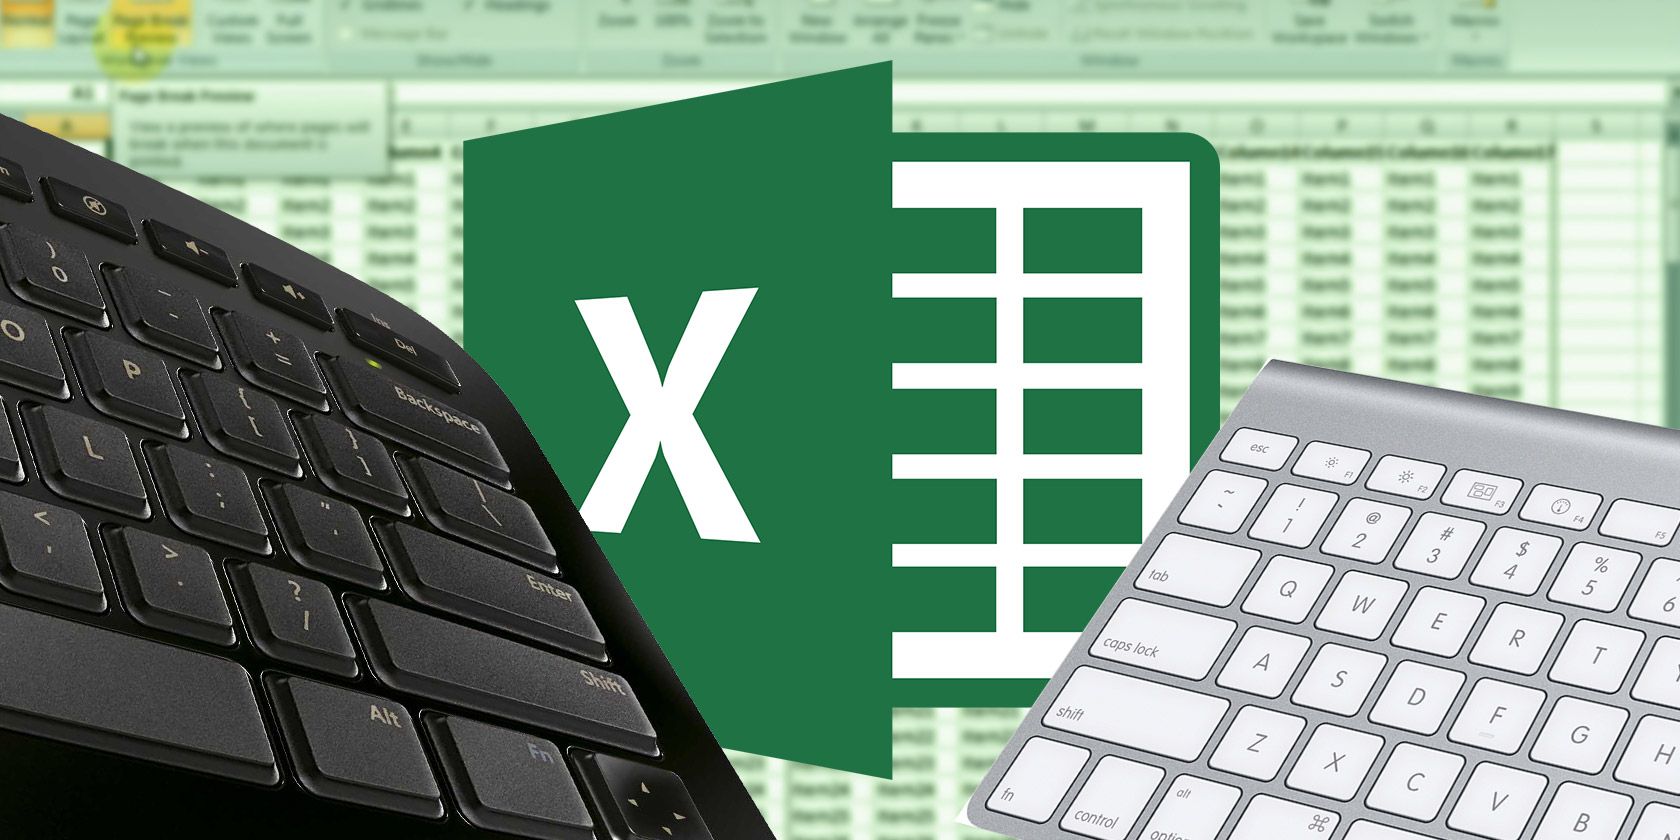 keyboard shortcuts not working in excel for mac